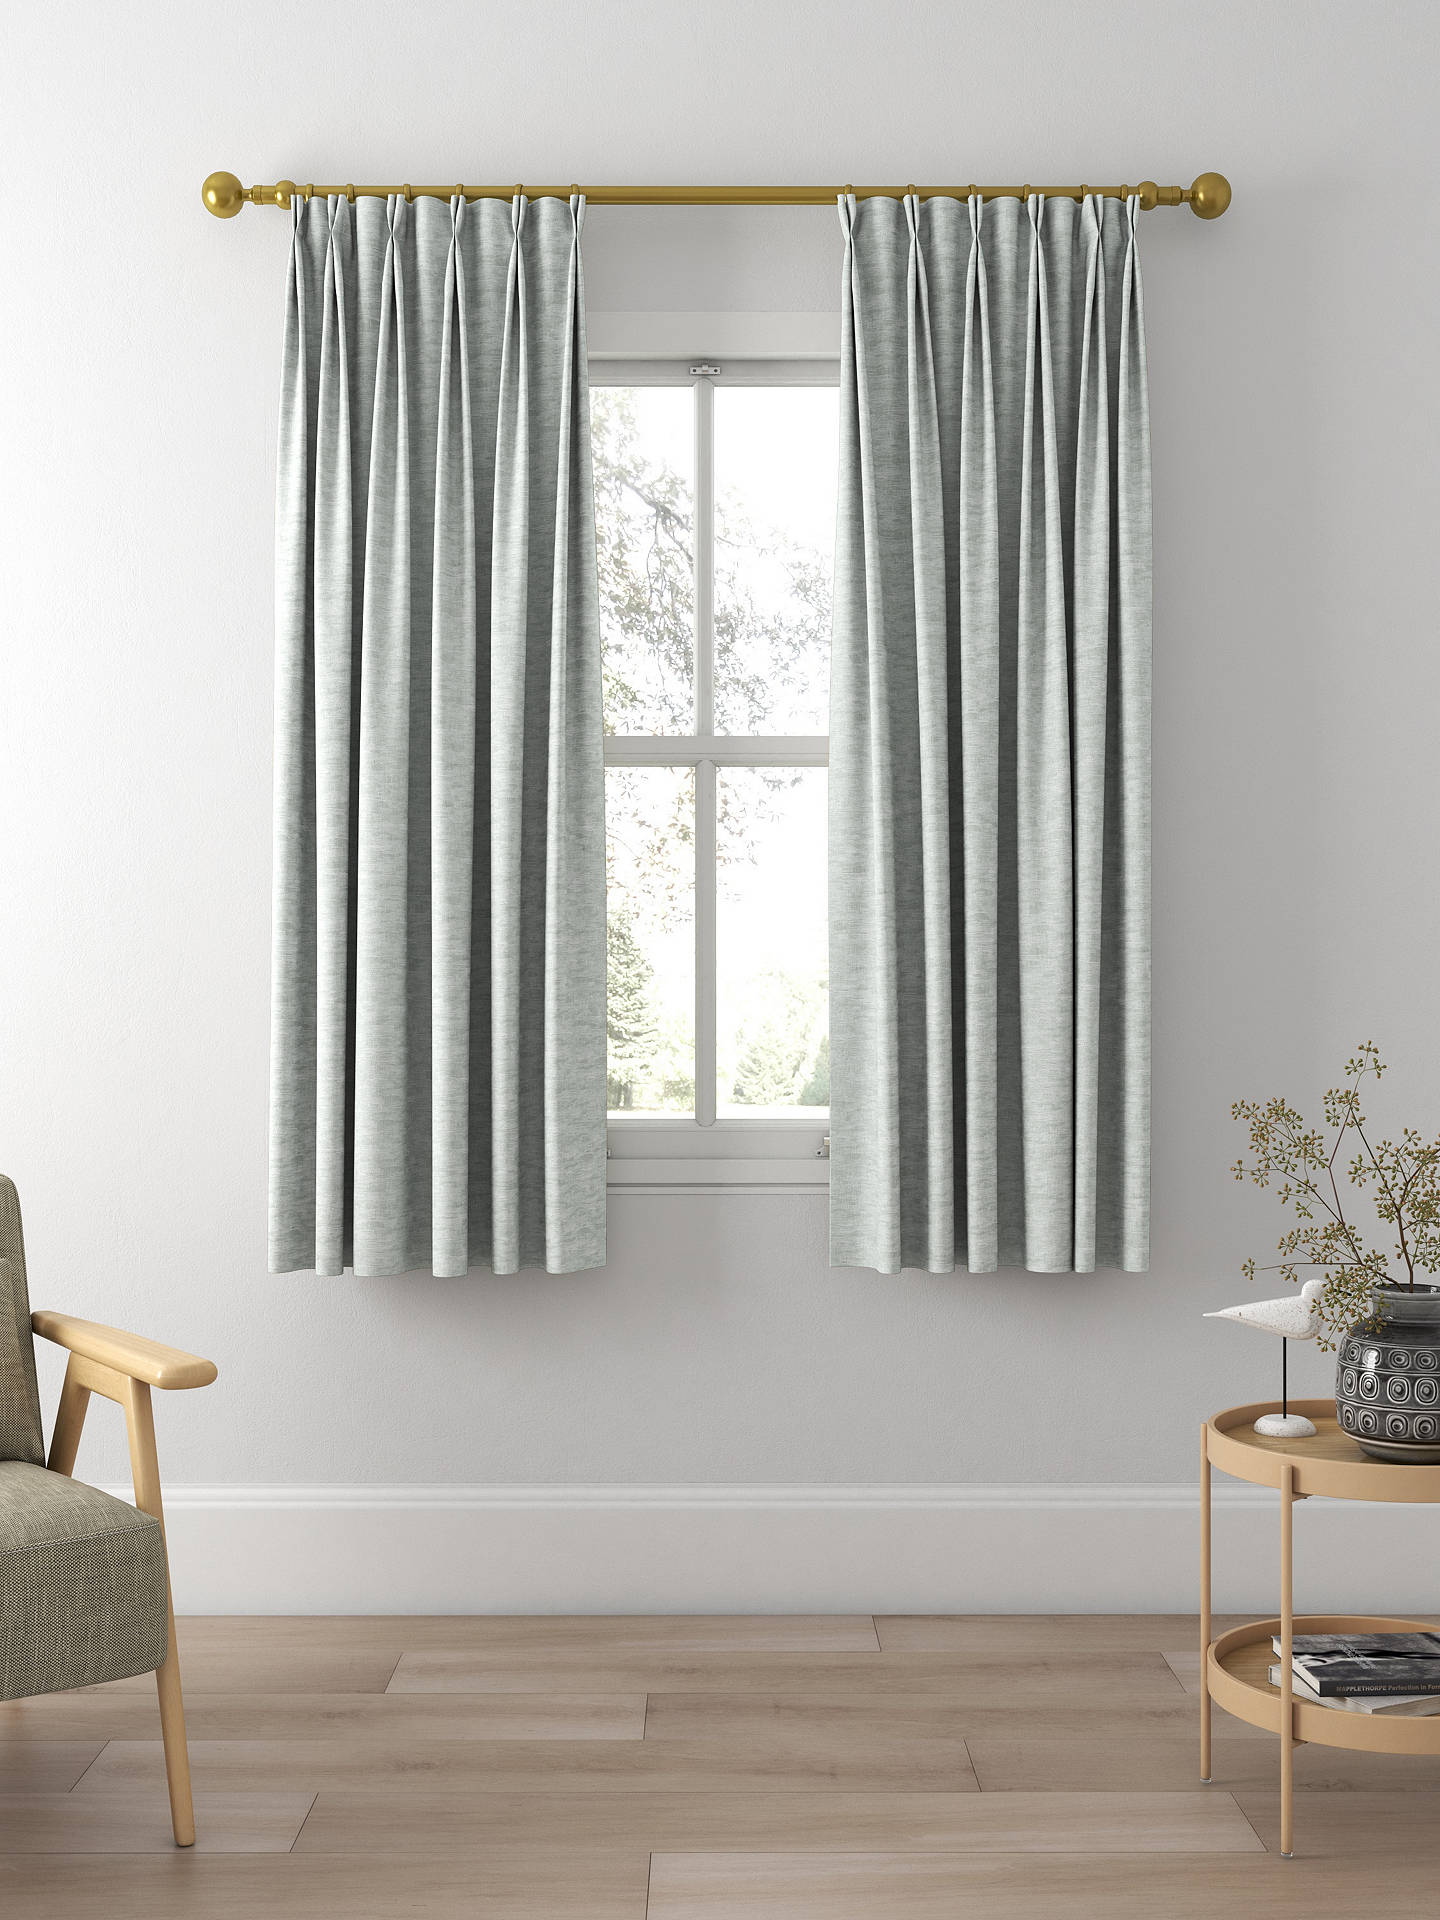 Laura Ashley Whinfell Made to Measure Curtains, Sage